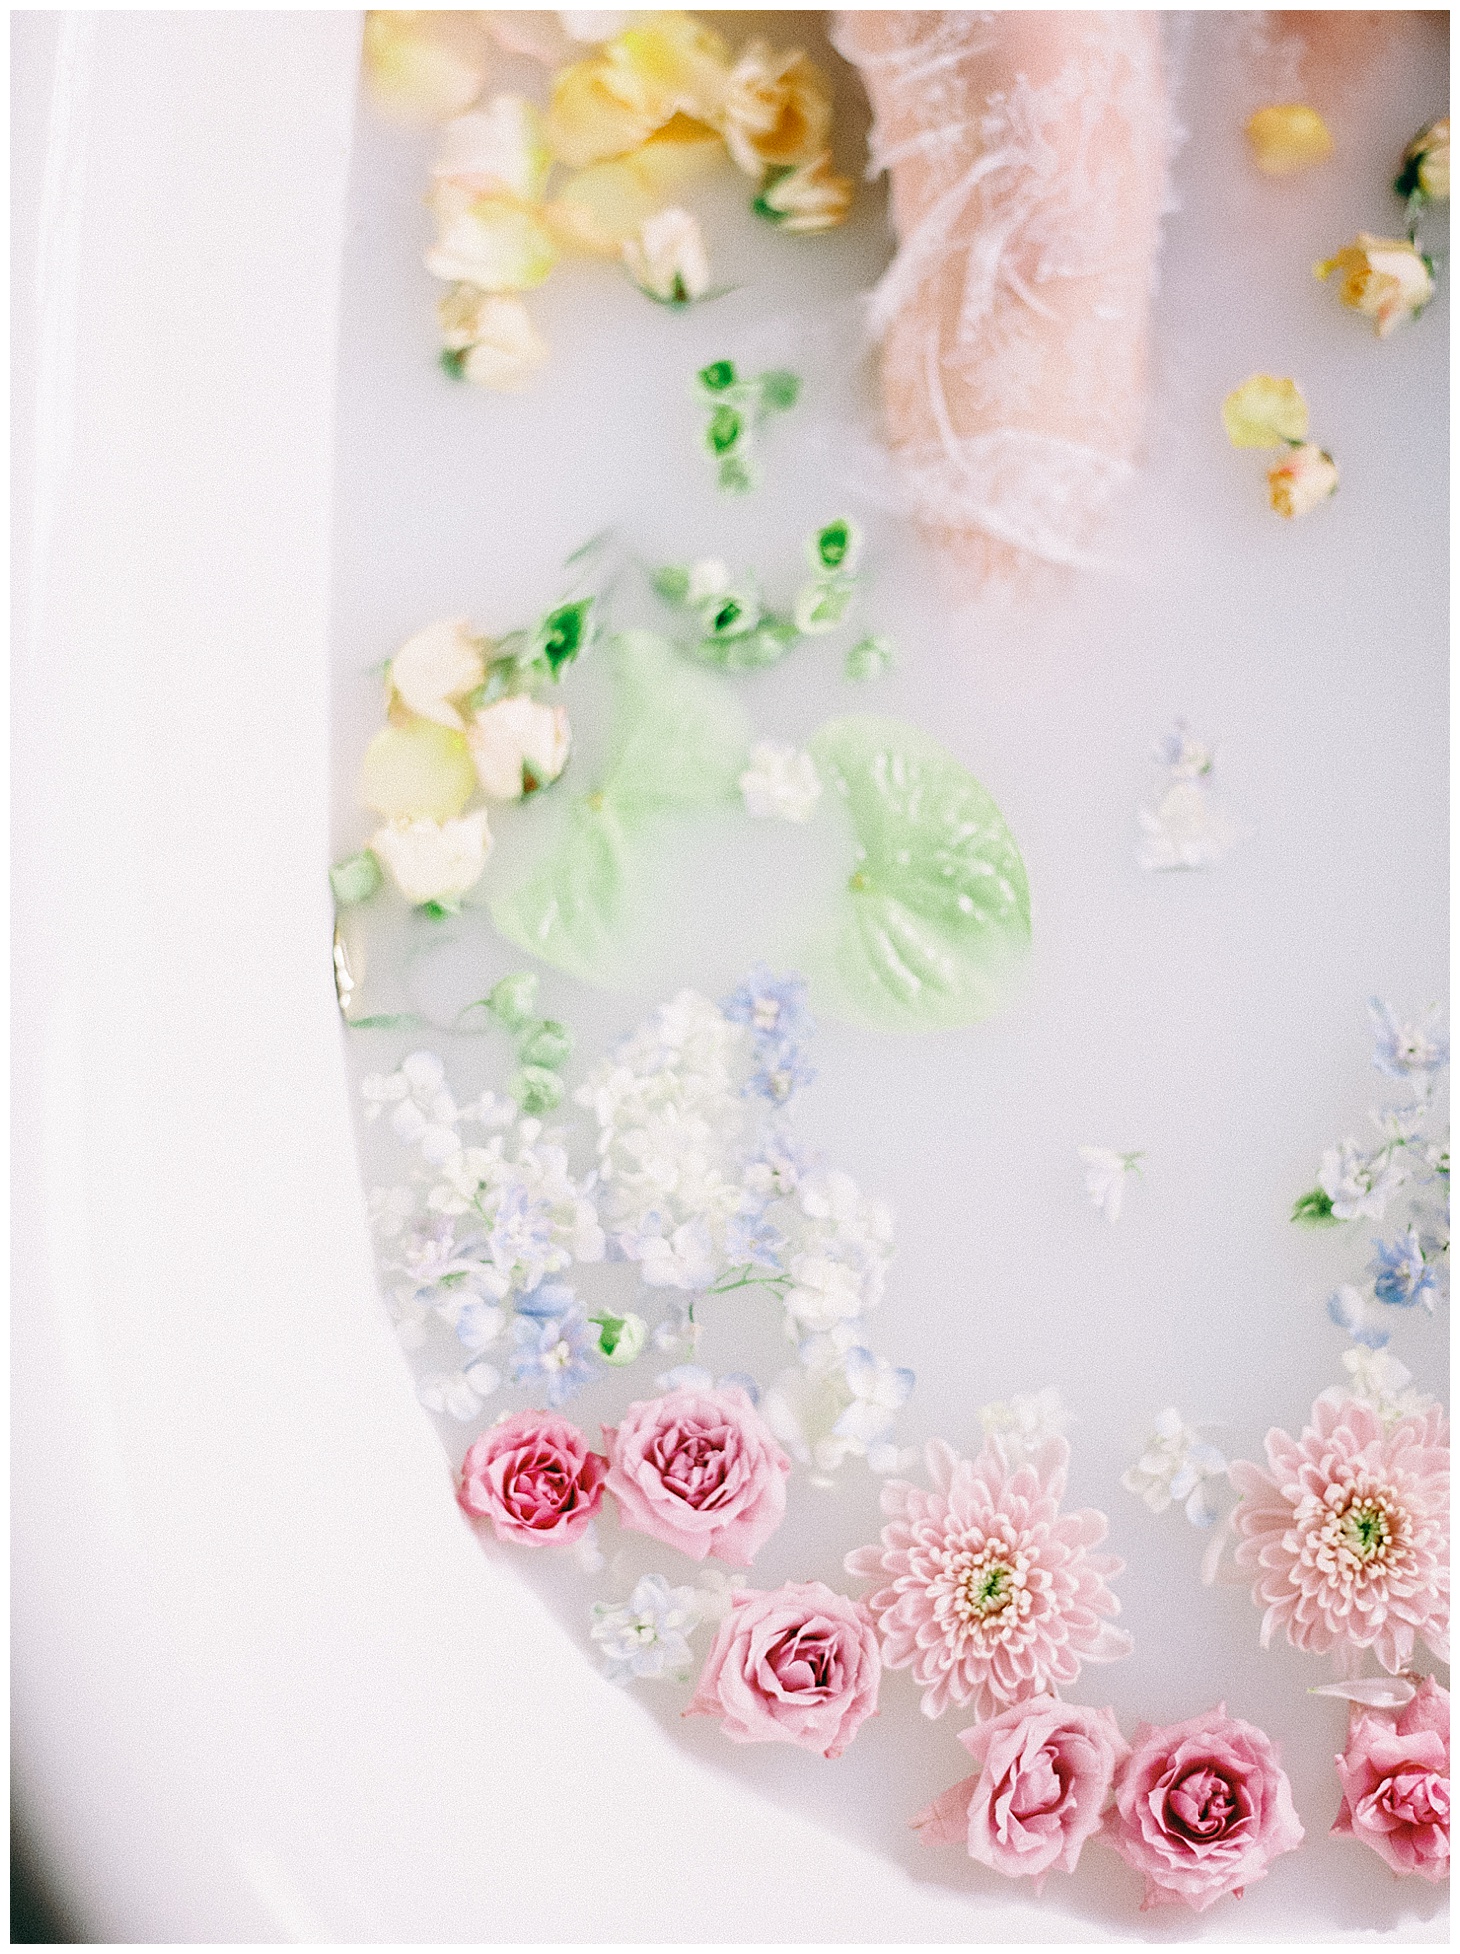 Ethereal Maternity Session, Floral Bath Maternity Session, Fine Art Maternity, Film Photography, Fine Art Film Photography, Nikki Santerre 